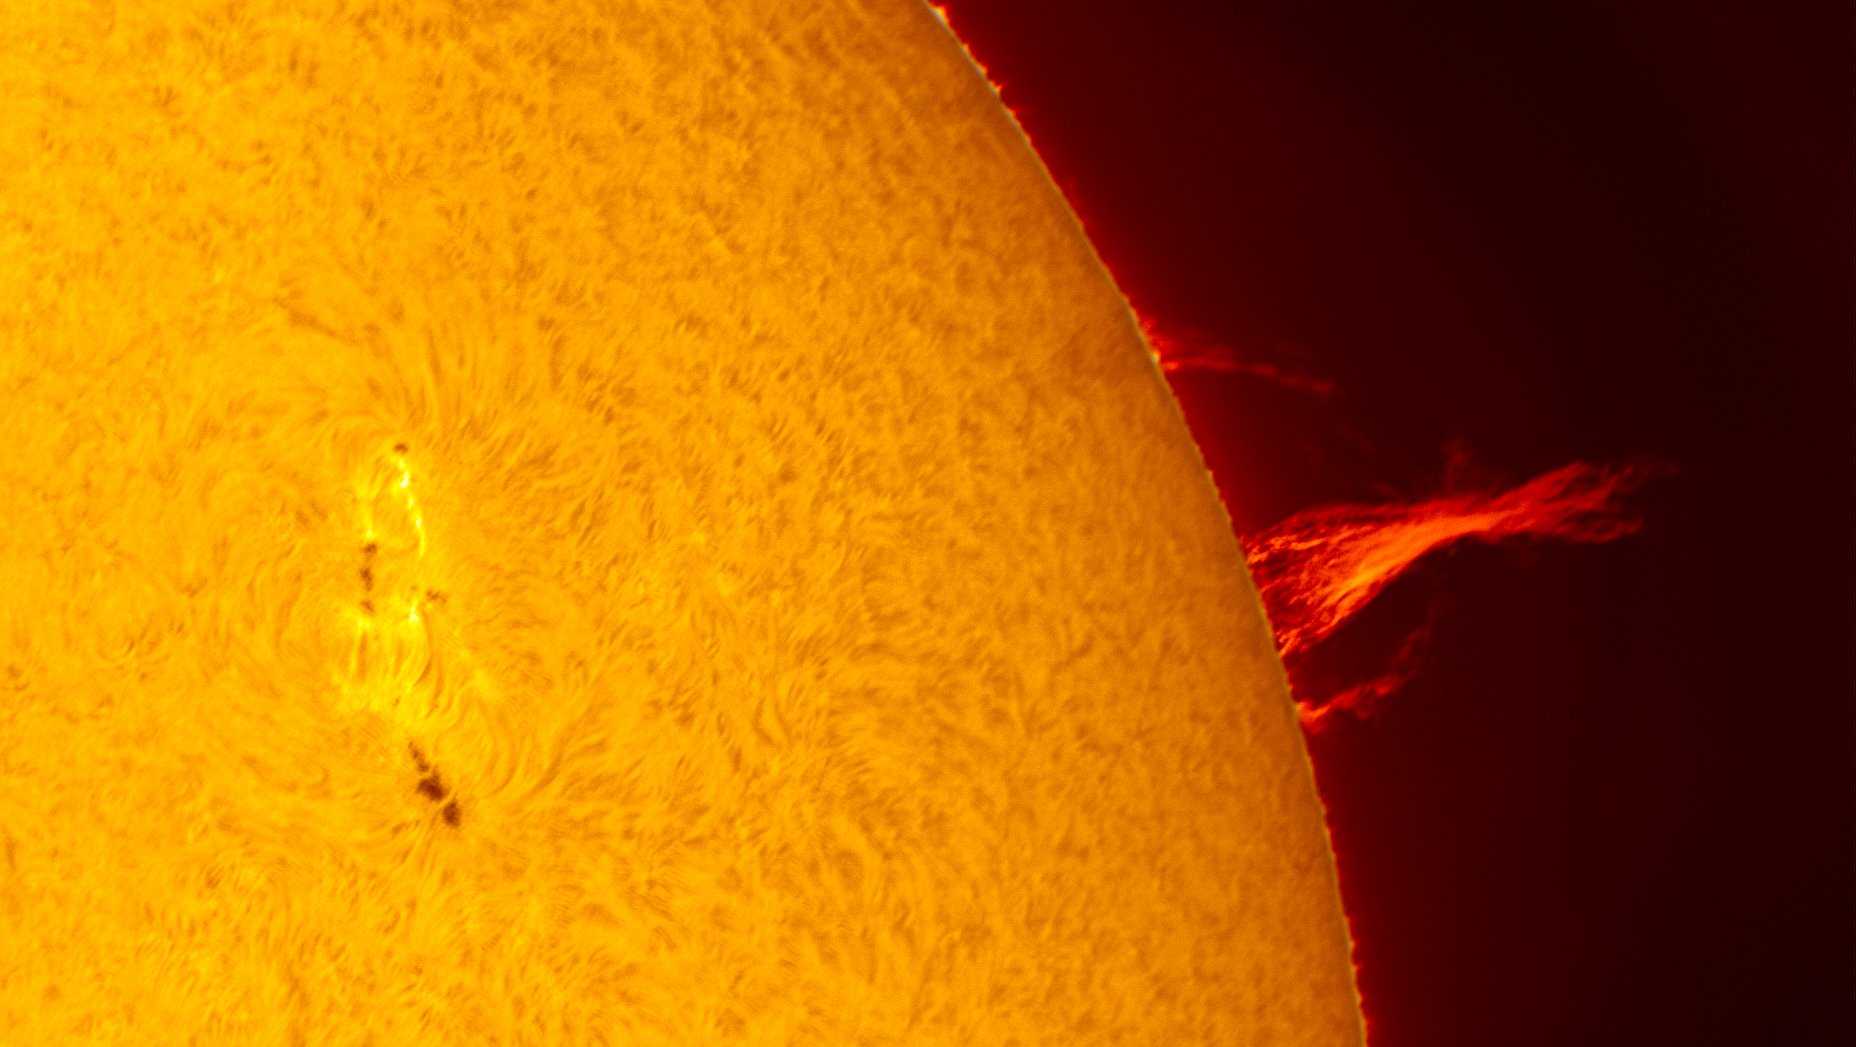 Solar disk and prominence with subgroup 3088 on August 28, 2022